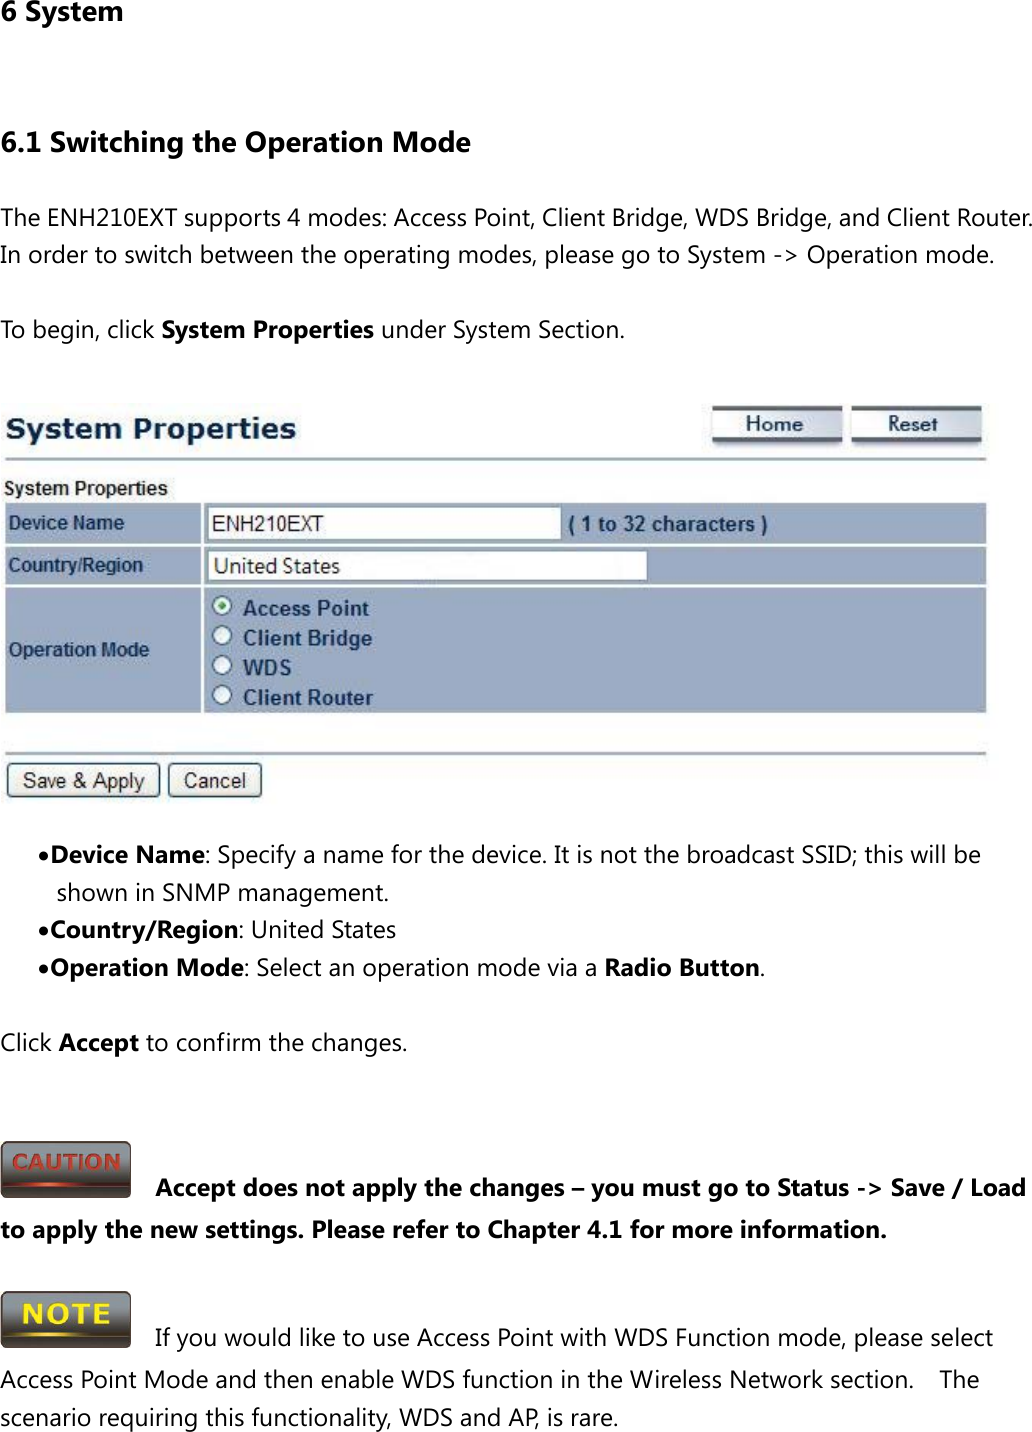 6 System 6.1 Switching the Operation Mode The ENH210EXT supports 4 modes: Access Point, Client Bridge, WDS Bridge, and Client Router. In order to switch between the operating modes, please go to System -&gt; Operation mode.  To begin, click System Properties under System Section.   • Device Name: Specify a name for the device. It is not the broadcast SSID; this will be shown in SNMP management. • Country/Region: United States • Operation Mode: Select an operation mode via a Radio Button.  Click Accept to confirm the changes.     Accept does not apply the changes – you must go to Status -&gt; Save / Load to apply the new settings. Please refer to Chapter 4.1 for more information.    If you would like to use Access Point with WDS Function mode, please select Access Point Mode and then enable WDS function in the Wireless Network section.  The scenario requiring this functionality, WDS and AP, is rare. 